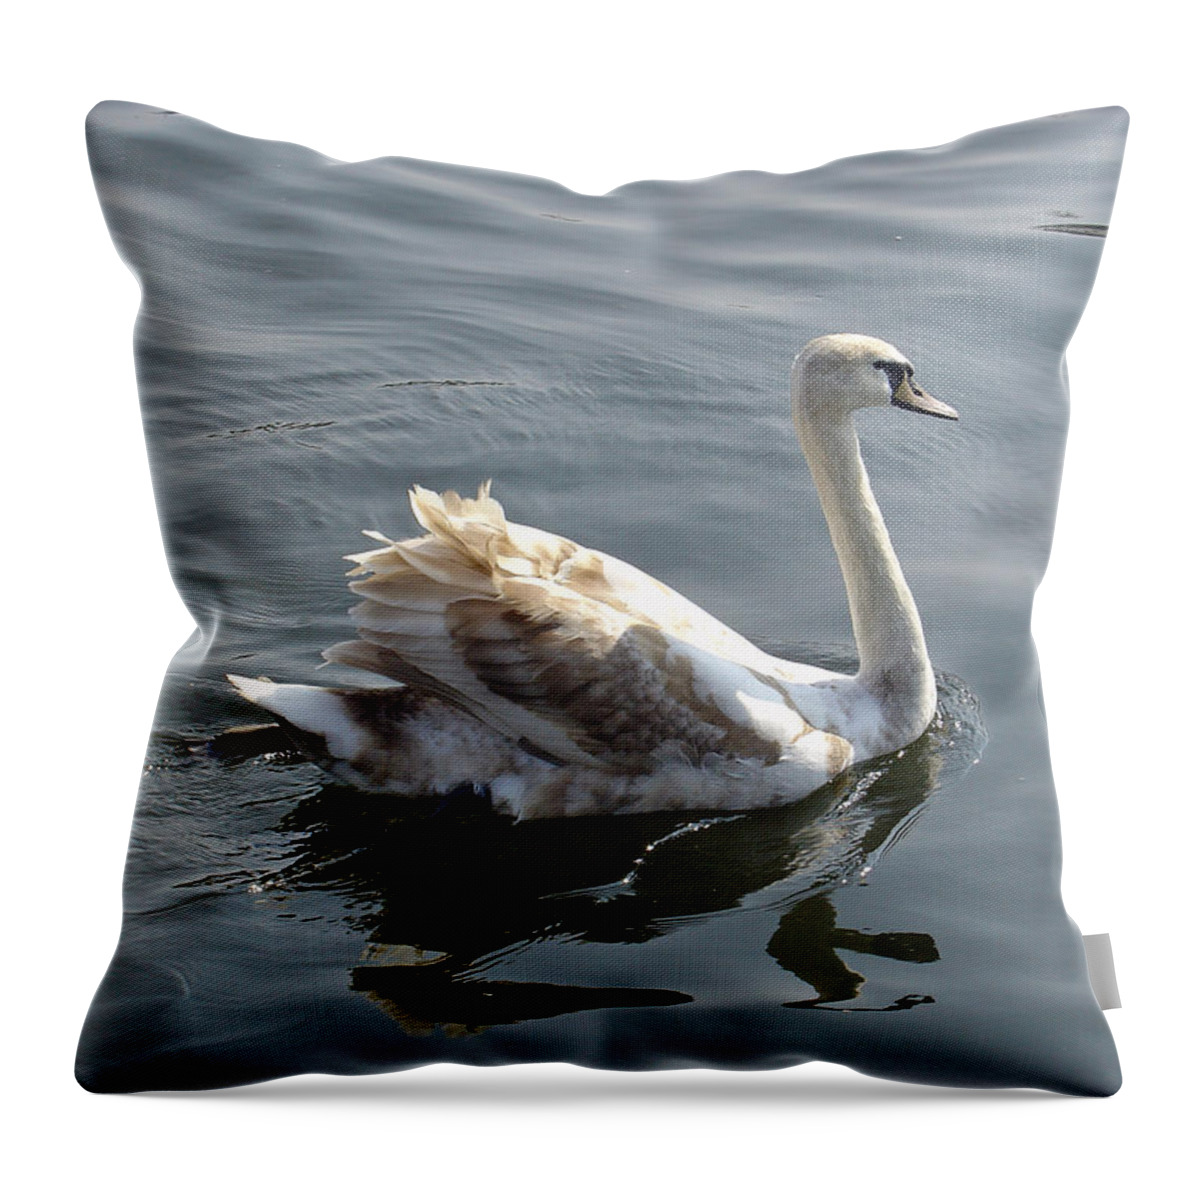 Europe Throw Pillow featuring the photograph Young Swan by Rod Johnson